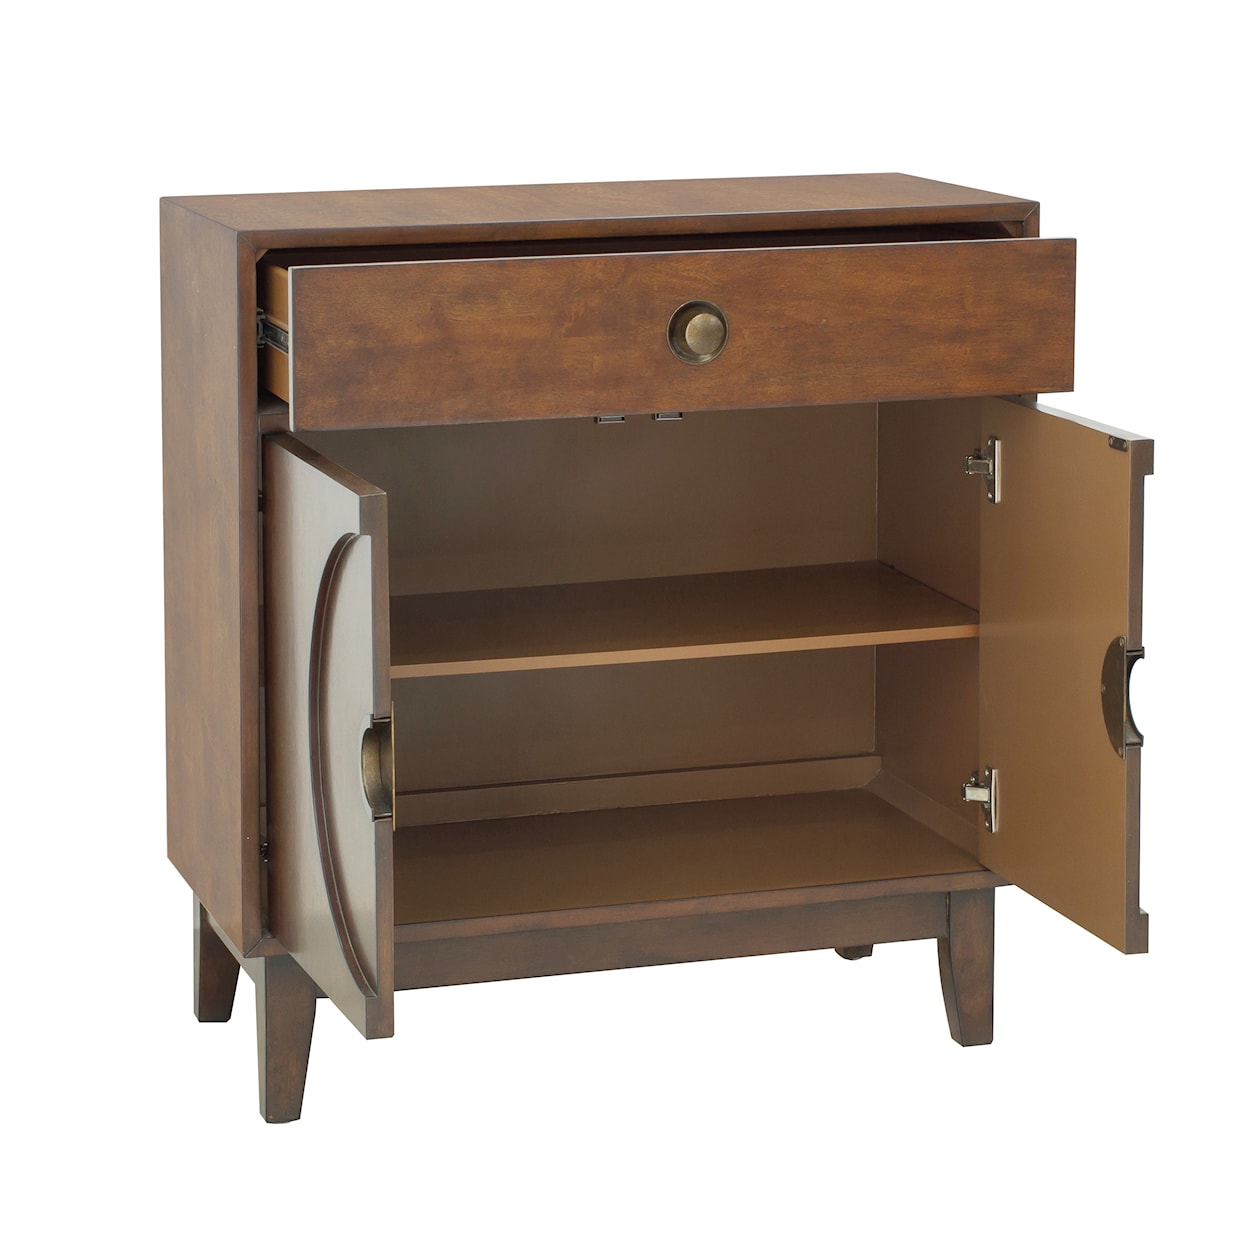 Accentrics Home Accents Mid-Century Modern Walnut Accent Chest